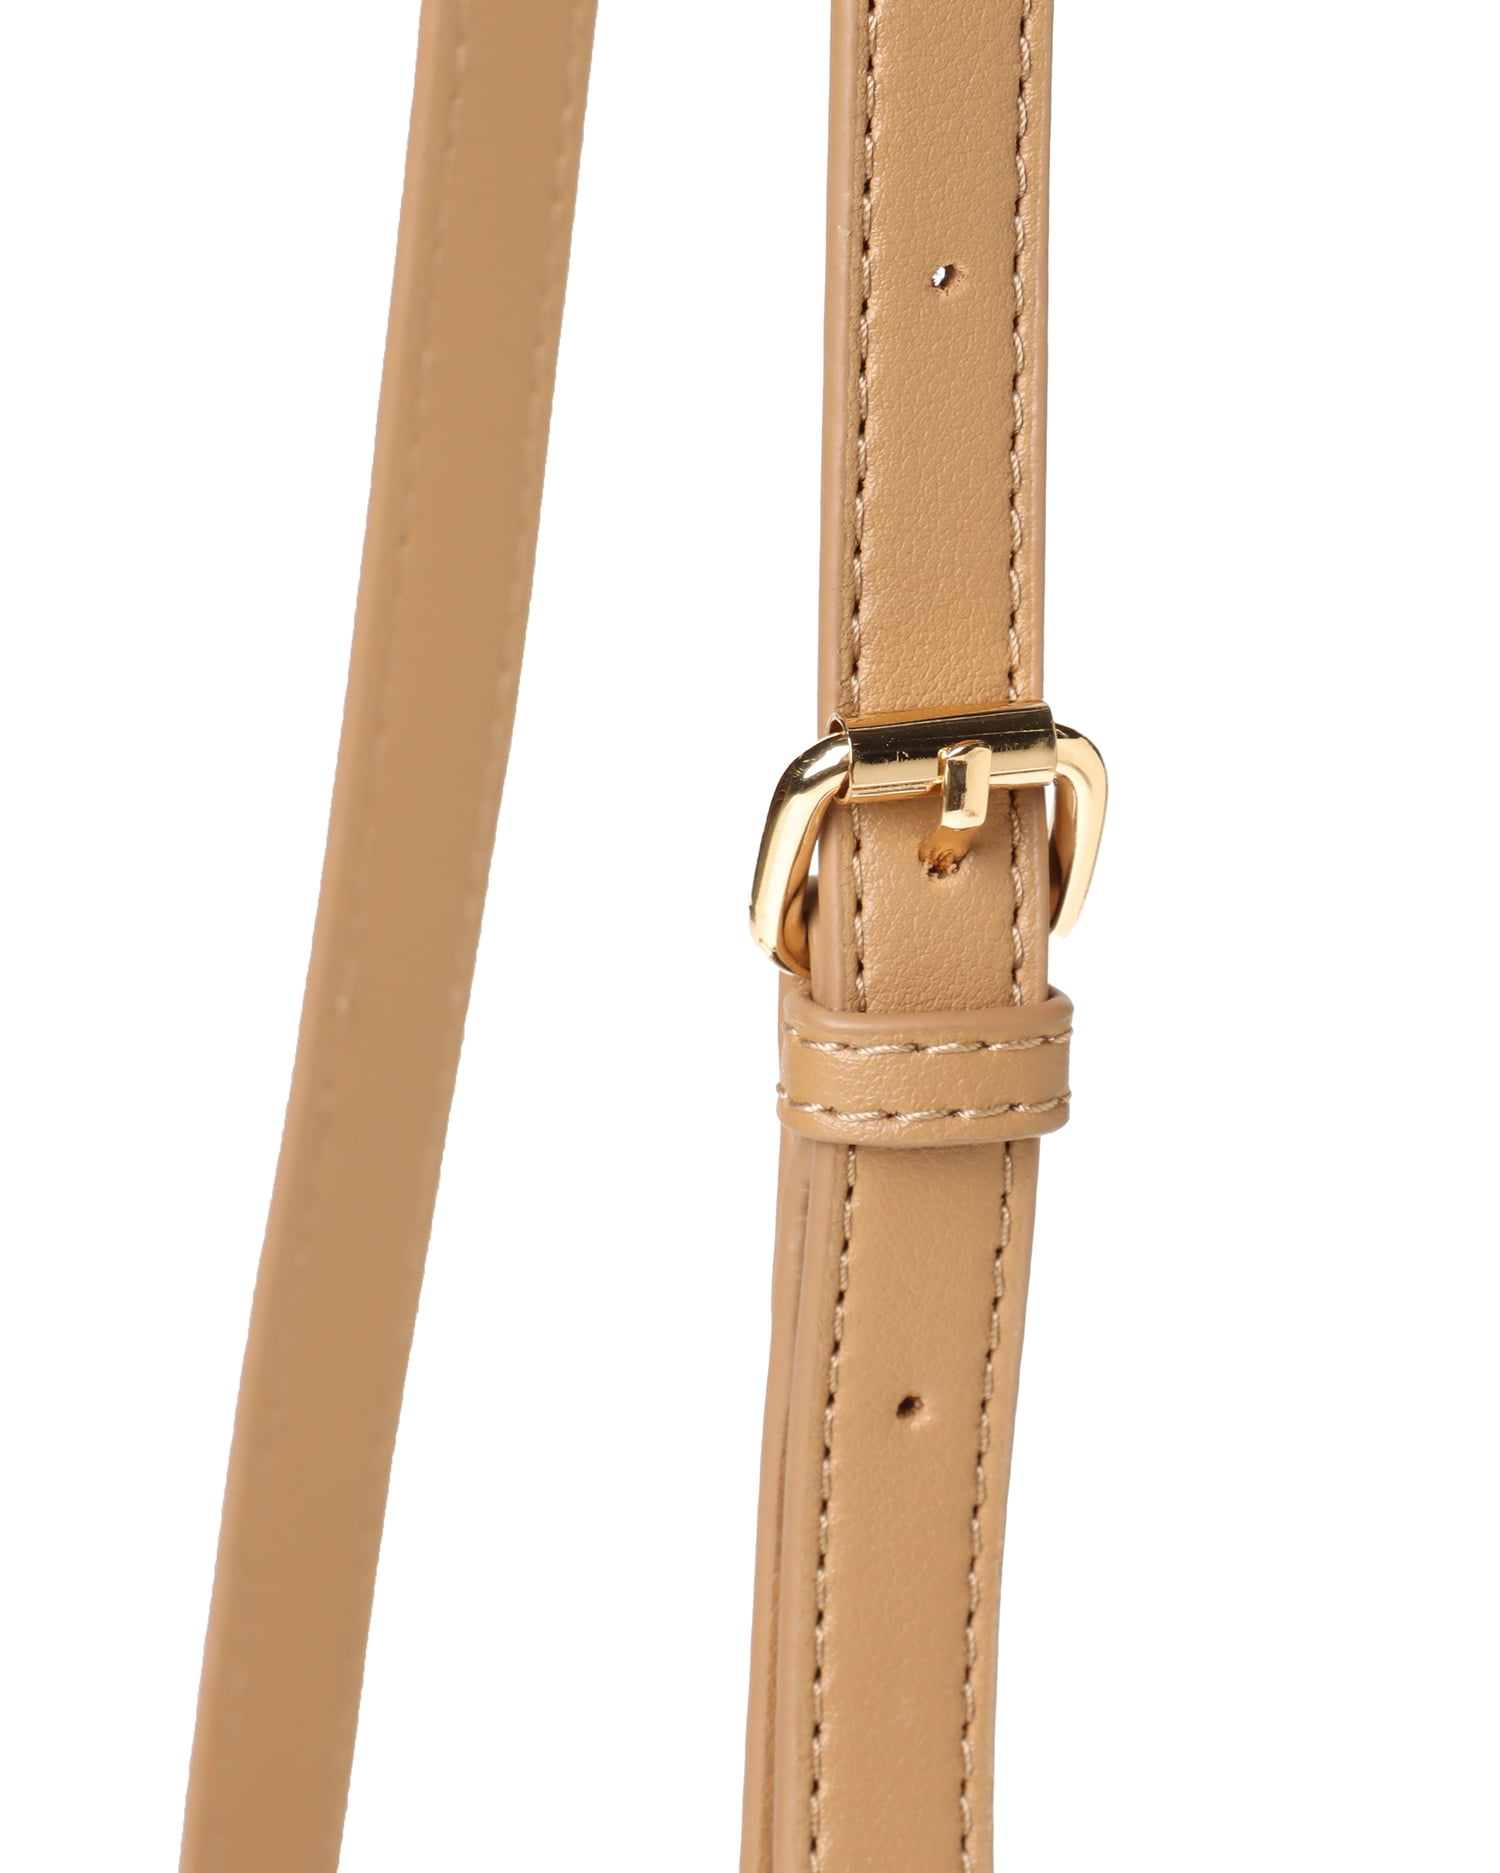 How to Use Louis Vuitton Dragonne Amovible Wrist Strap 